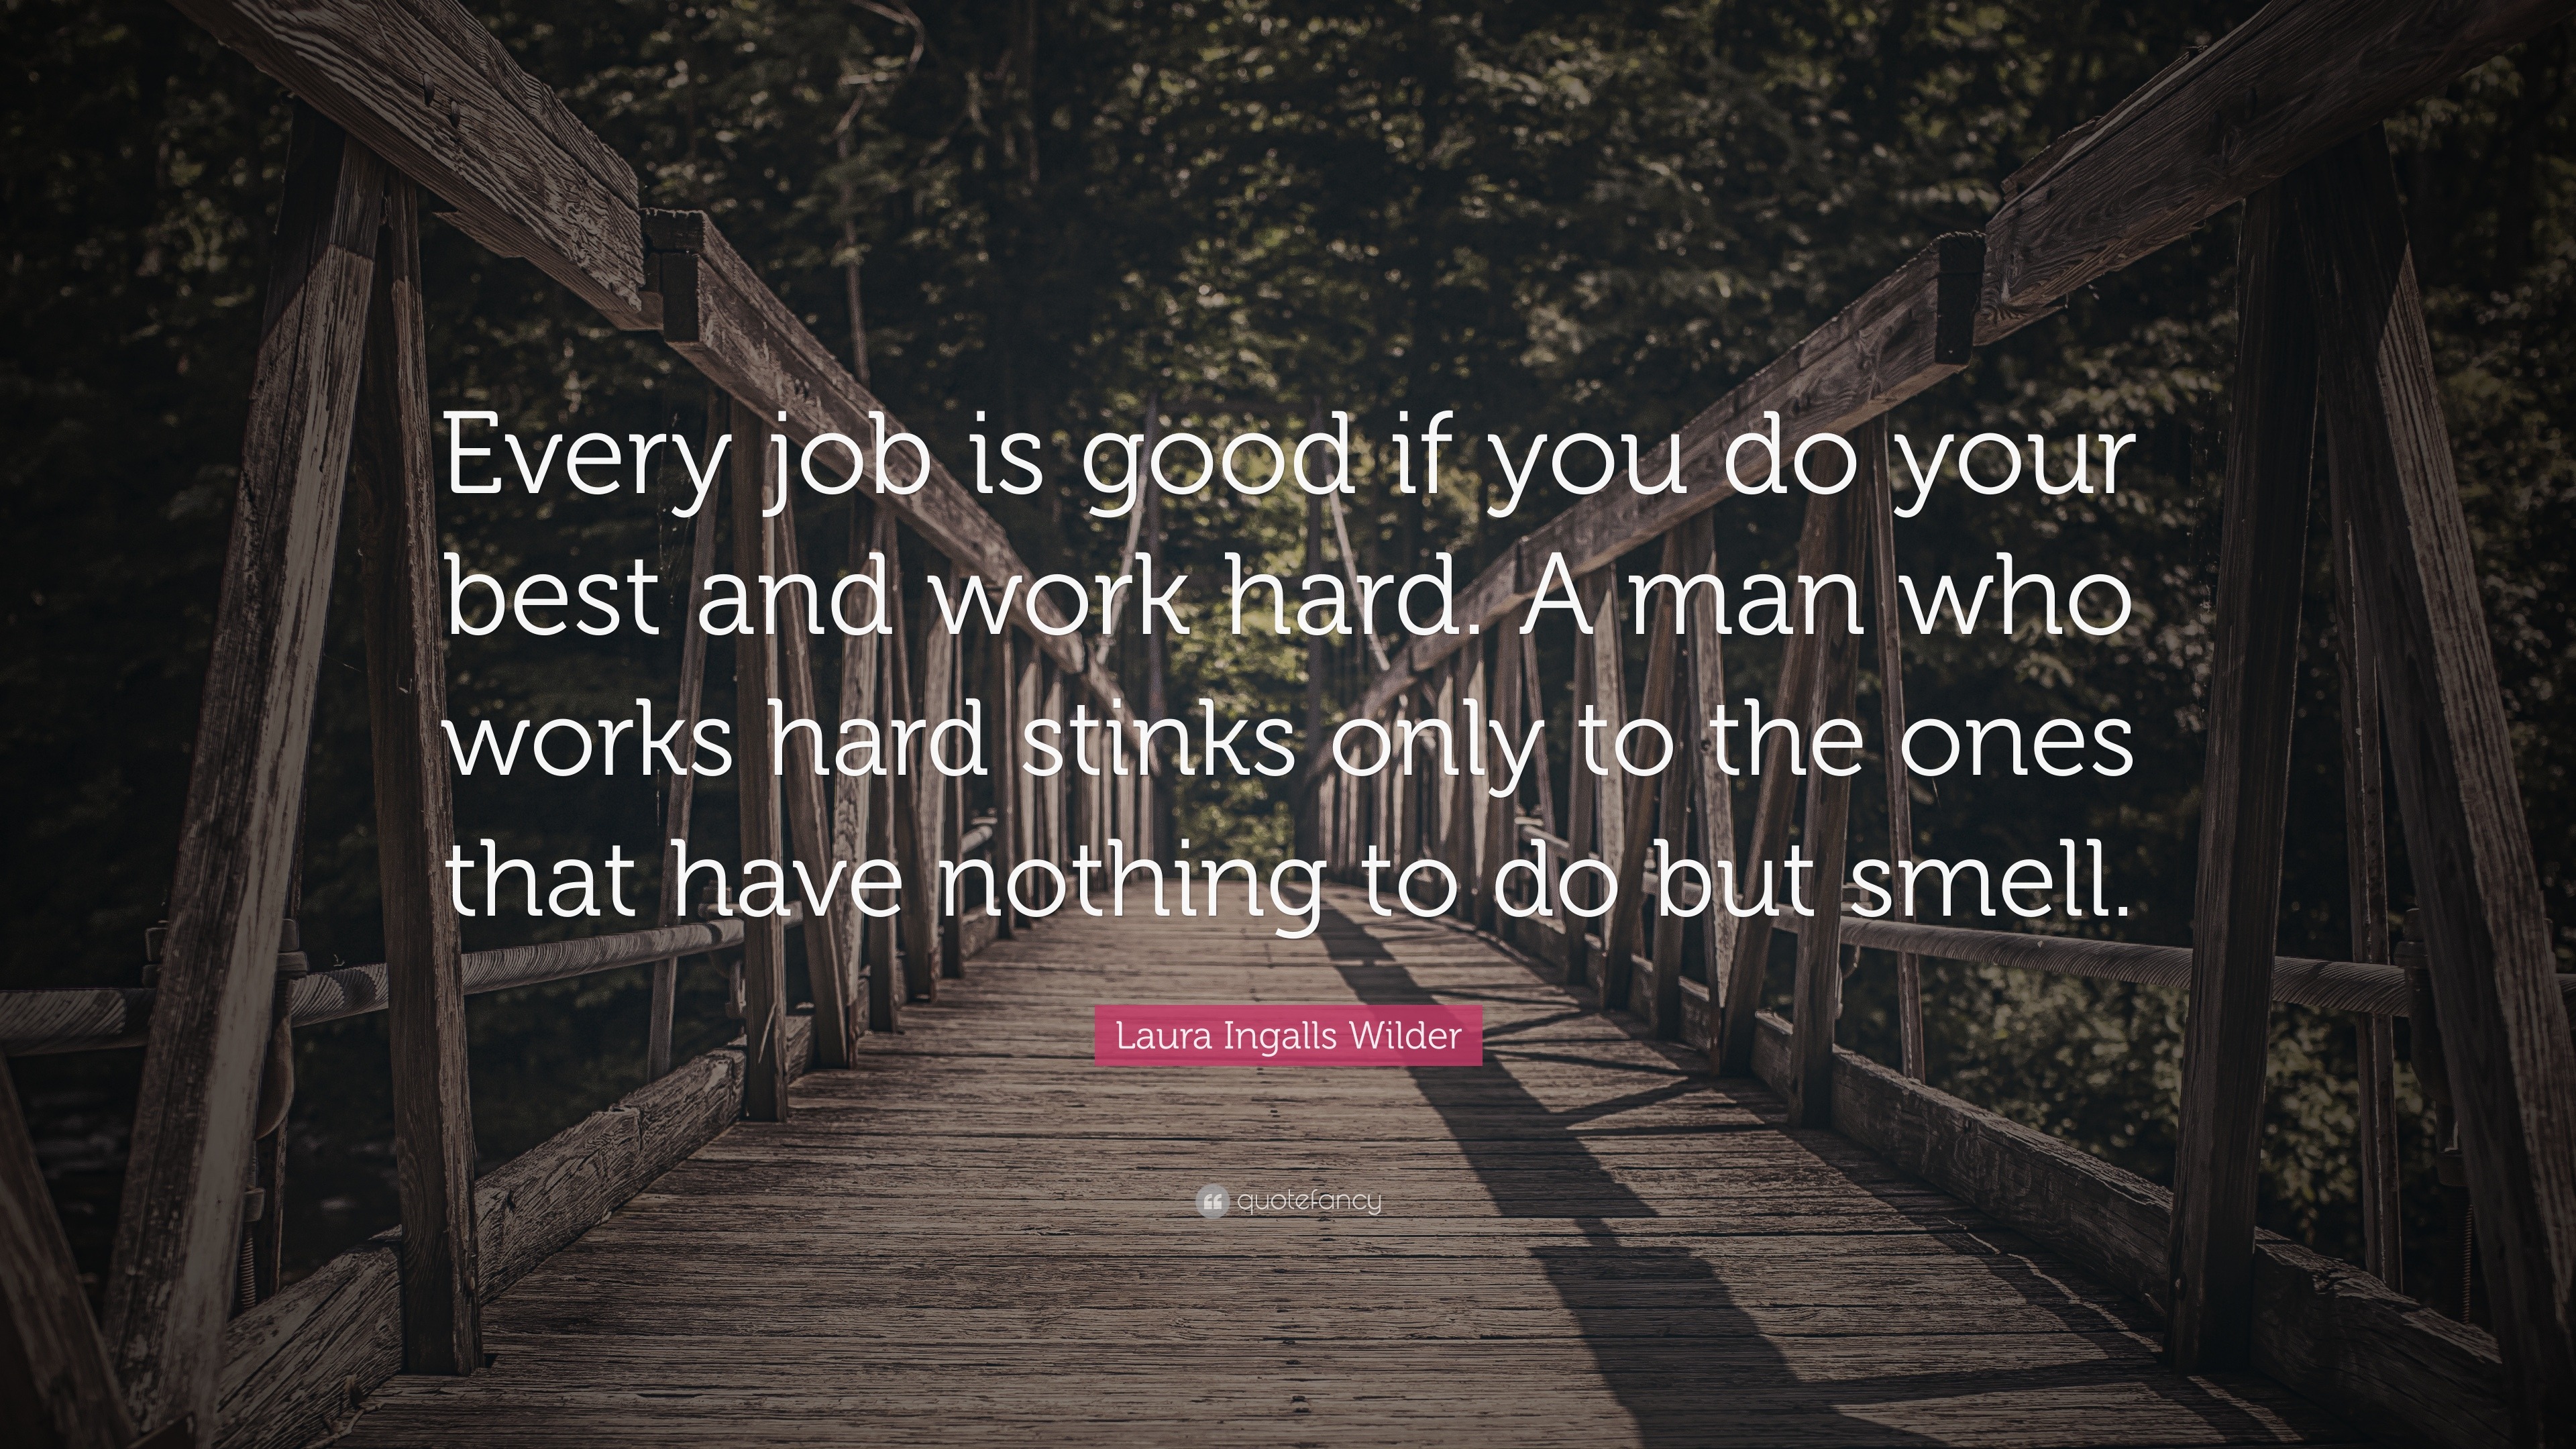 Laura Ingalls Wilder Quote Every Job Is Good If You Do Your Best And Work Hard A Man Who Works Hard Stinks Only To The Ones That Have Nothing To D